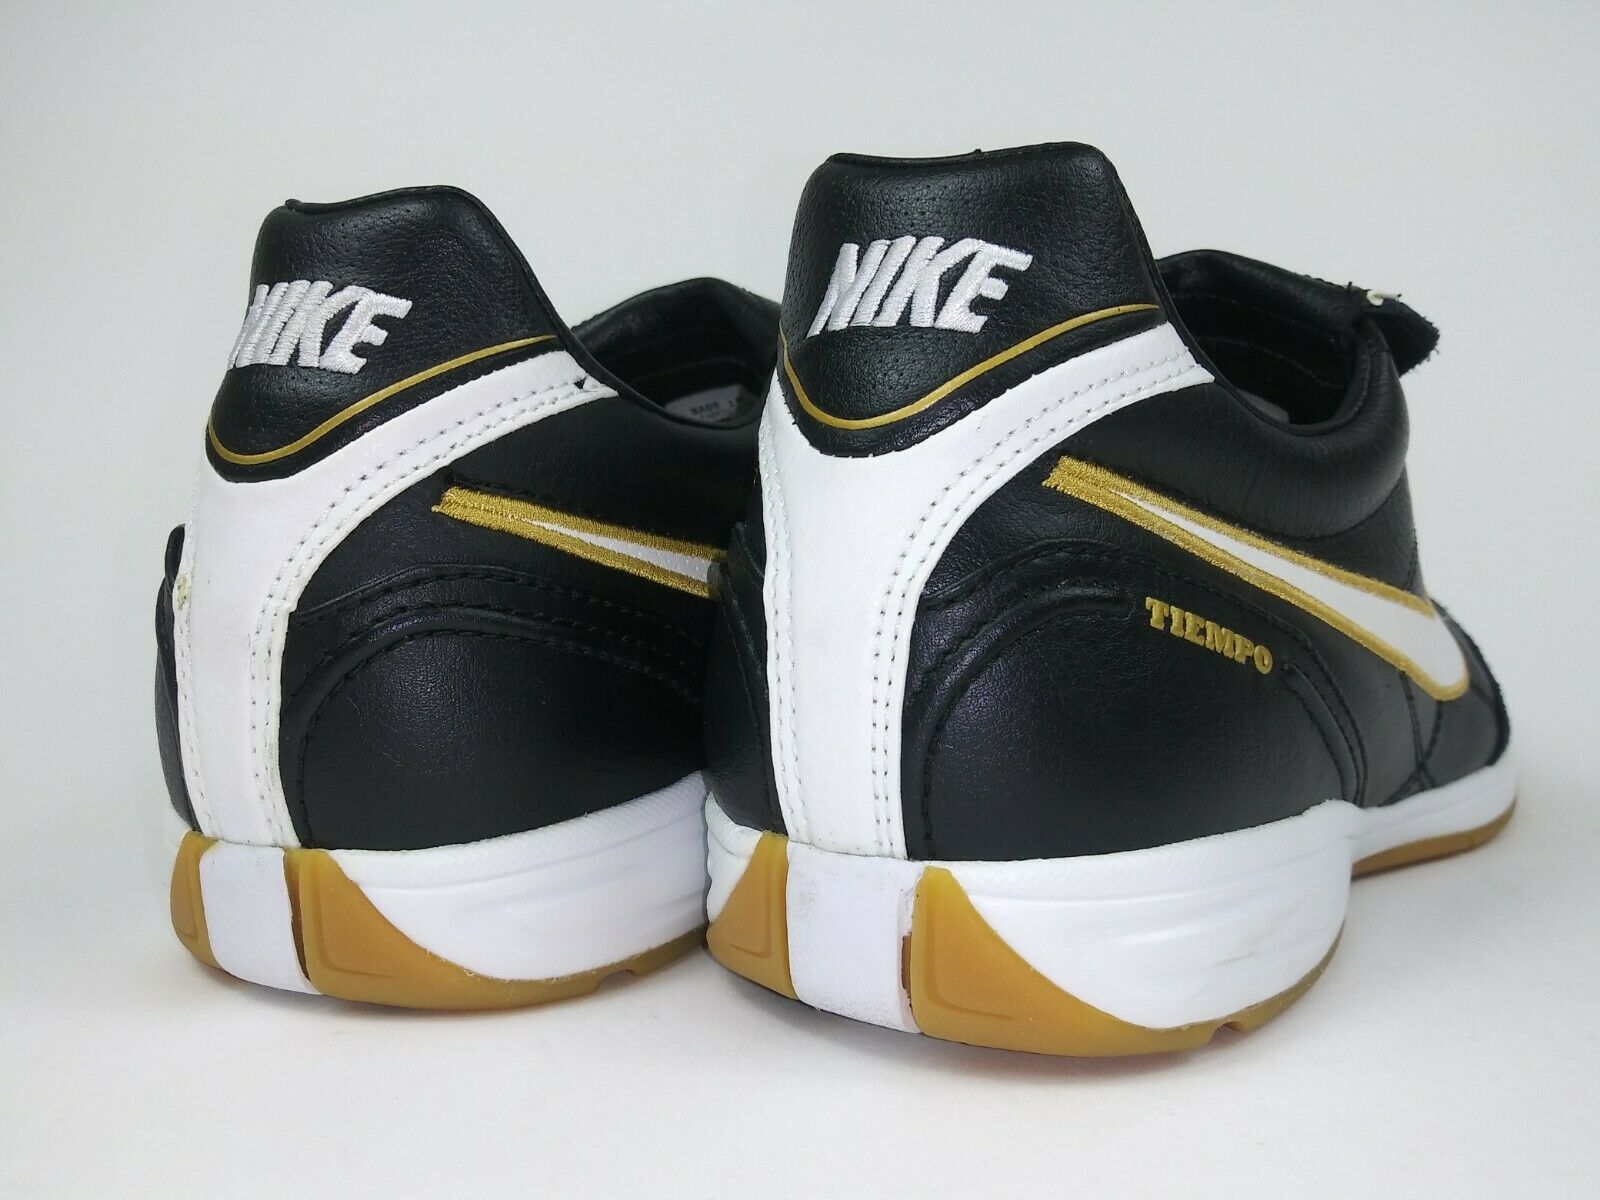 Nike lll IC Indoor Shoes Black Gold – Villegas